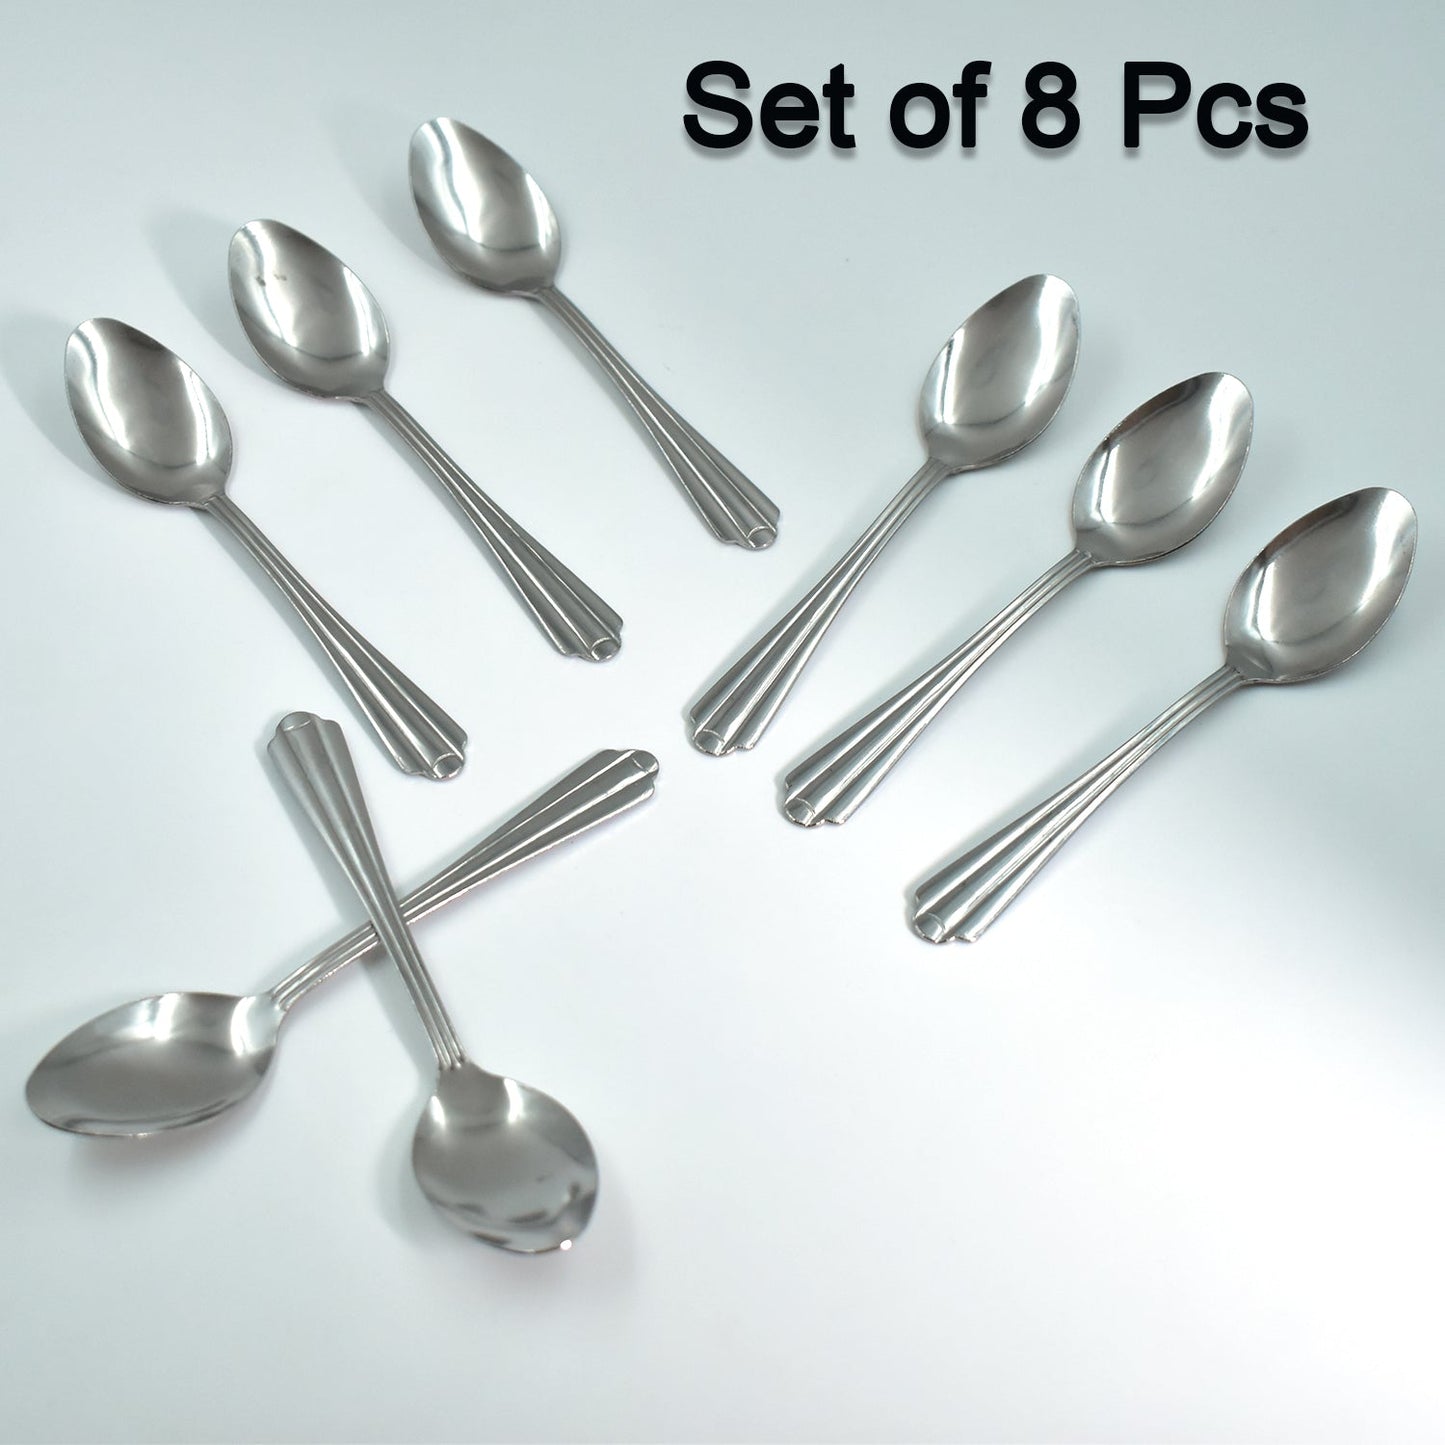 2779 (set of 8pc) small tea spoon Set for Tea, Coffee, Sugar & Spices, Small Spoons